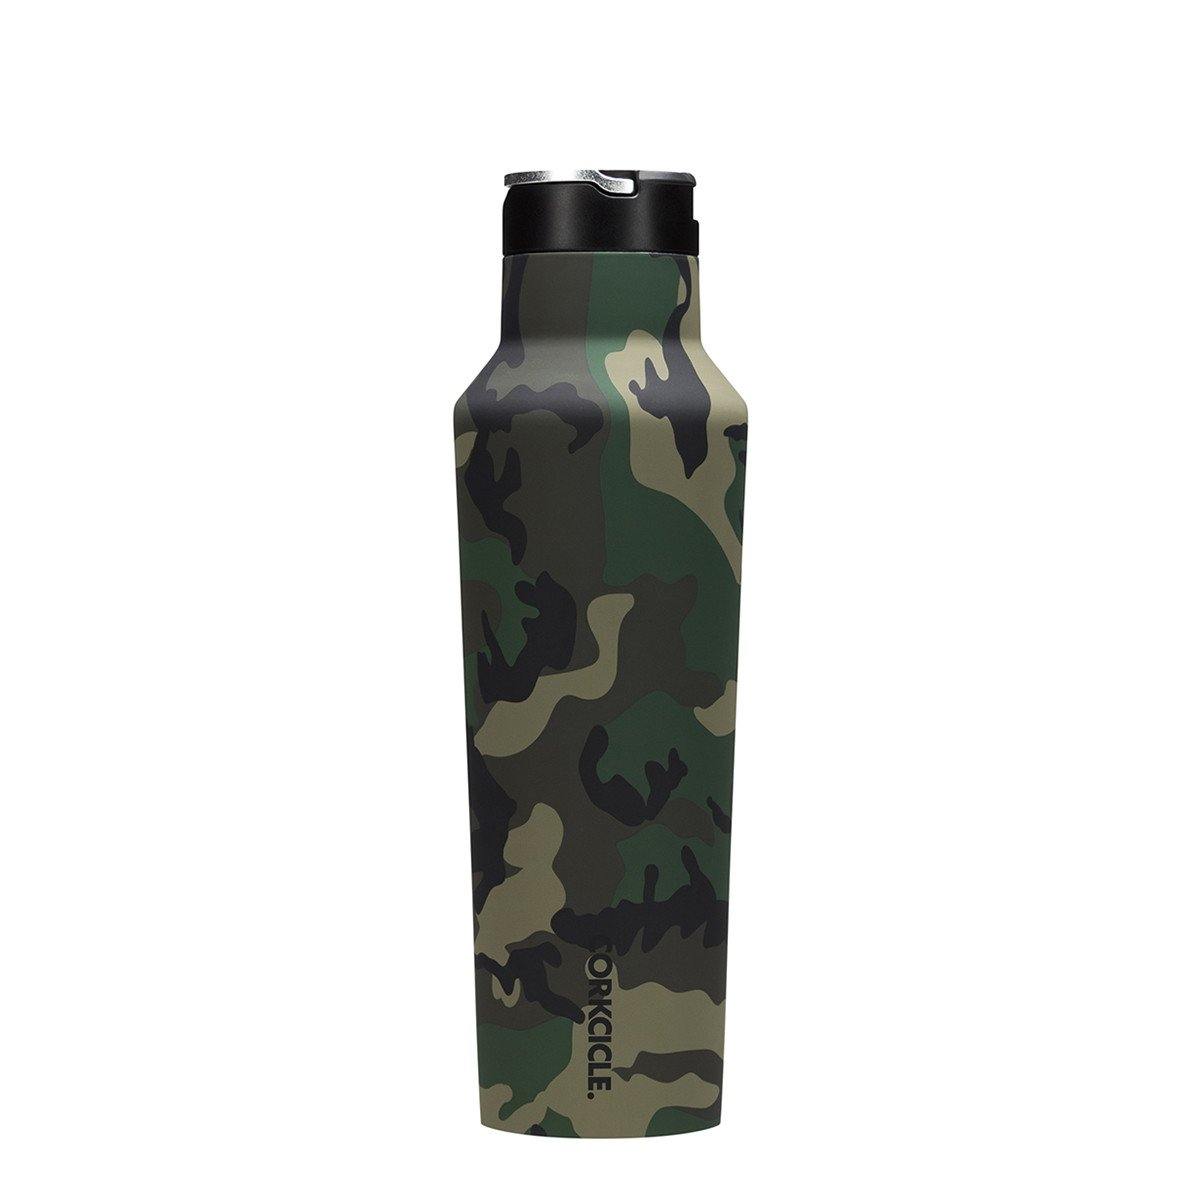 Corkcicle Woodland Camo Sports Canteen 600ml | Army Drink Bottle | corkcicle water bottle | corkcicle australia | corkcicle coffee mug | corkcicle canteen | water bottles | insulated water bottle | stainless steel water bottle | tumbler bottle | drink bottle | corkcicle mug | corkcicle cup | insulated bottle | corkcicle stemless | insulated water bottle with straw | water canteen | corkcicle sale